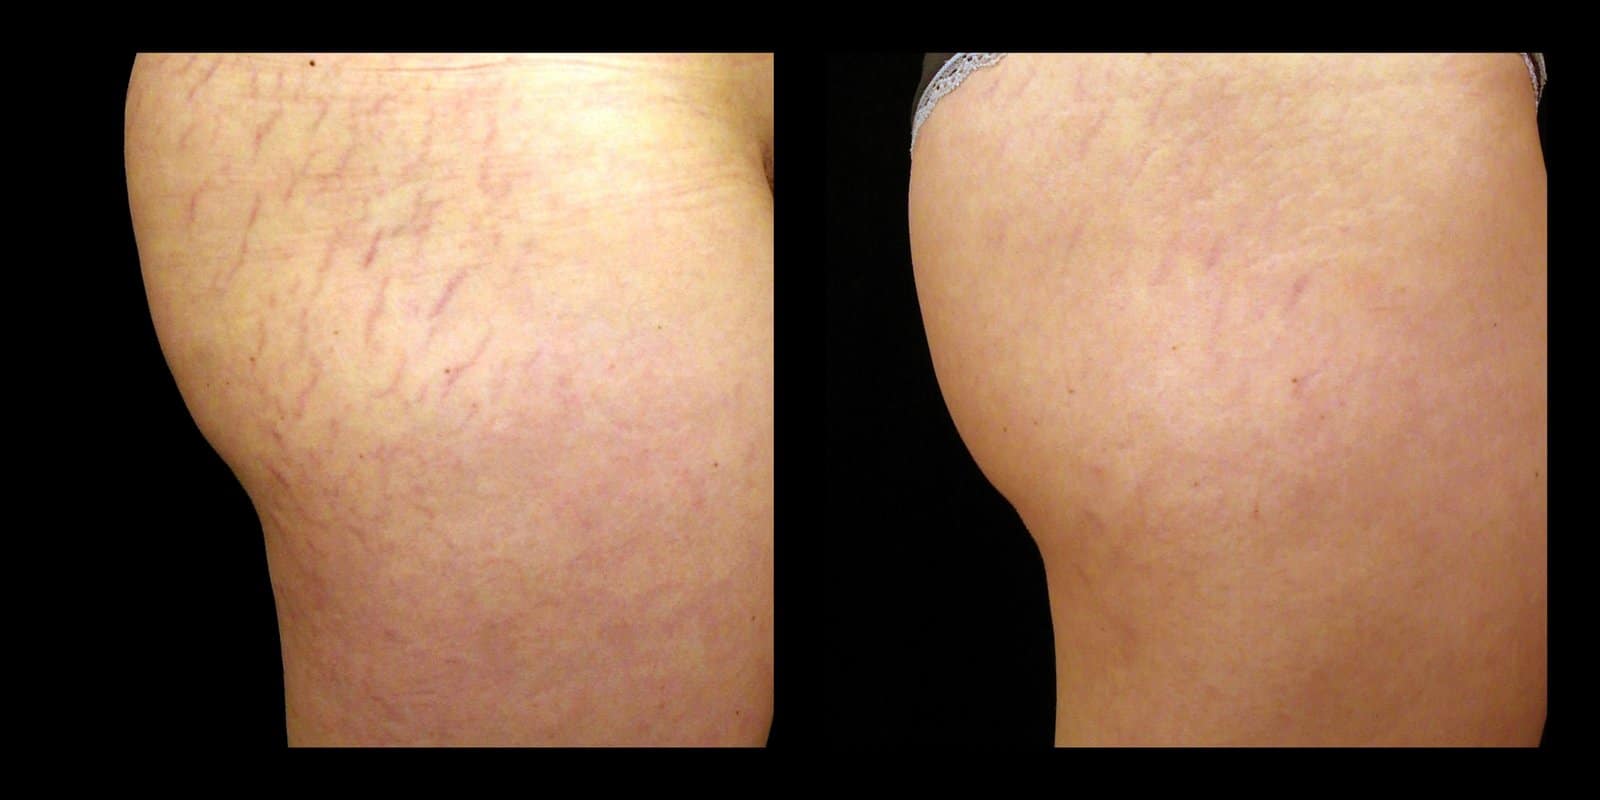 affirm stretch marks before and after